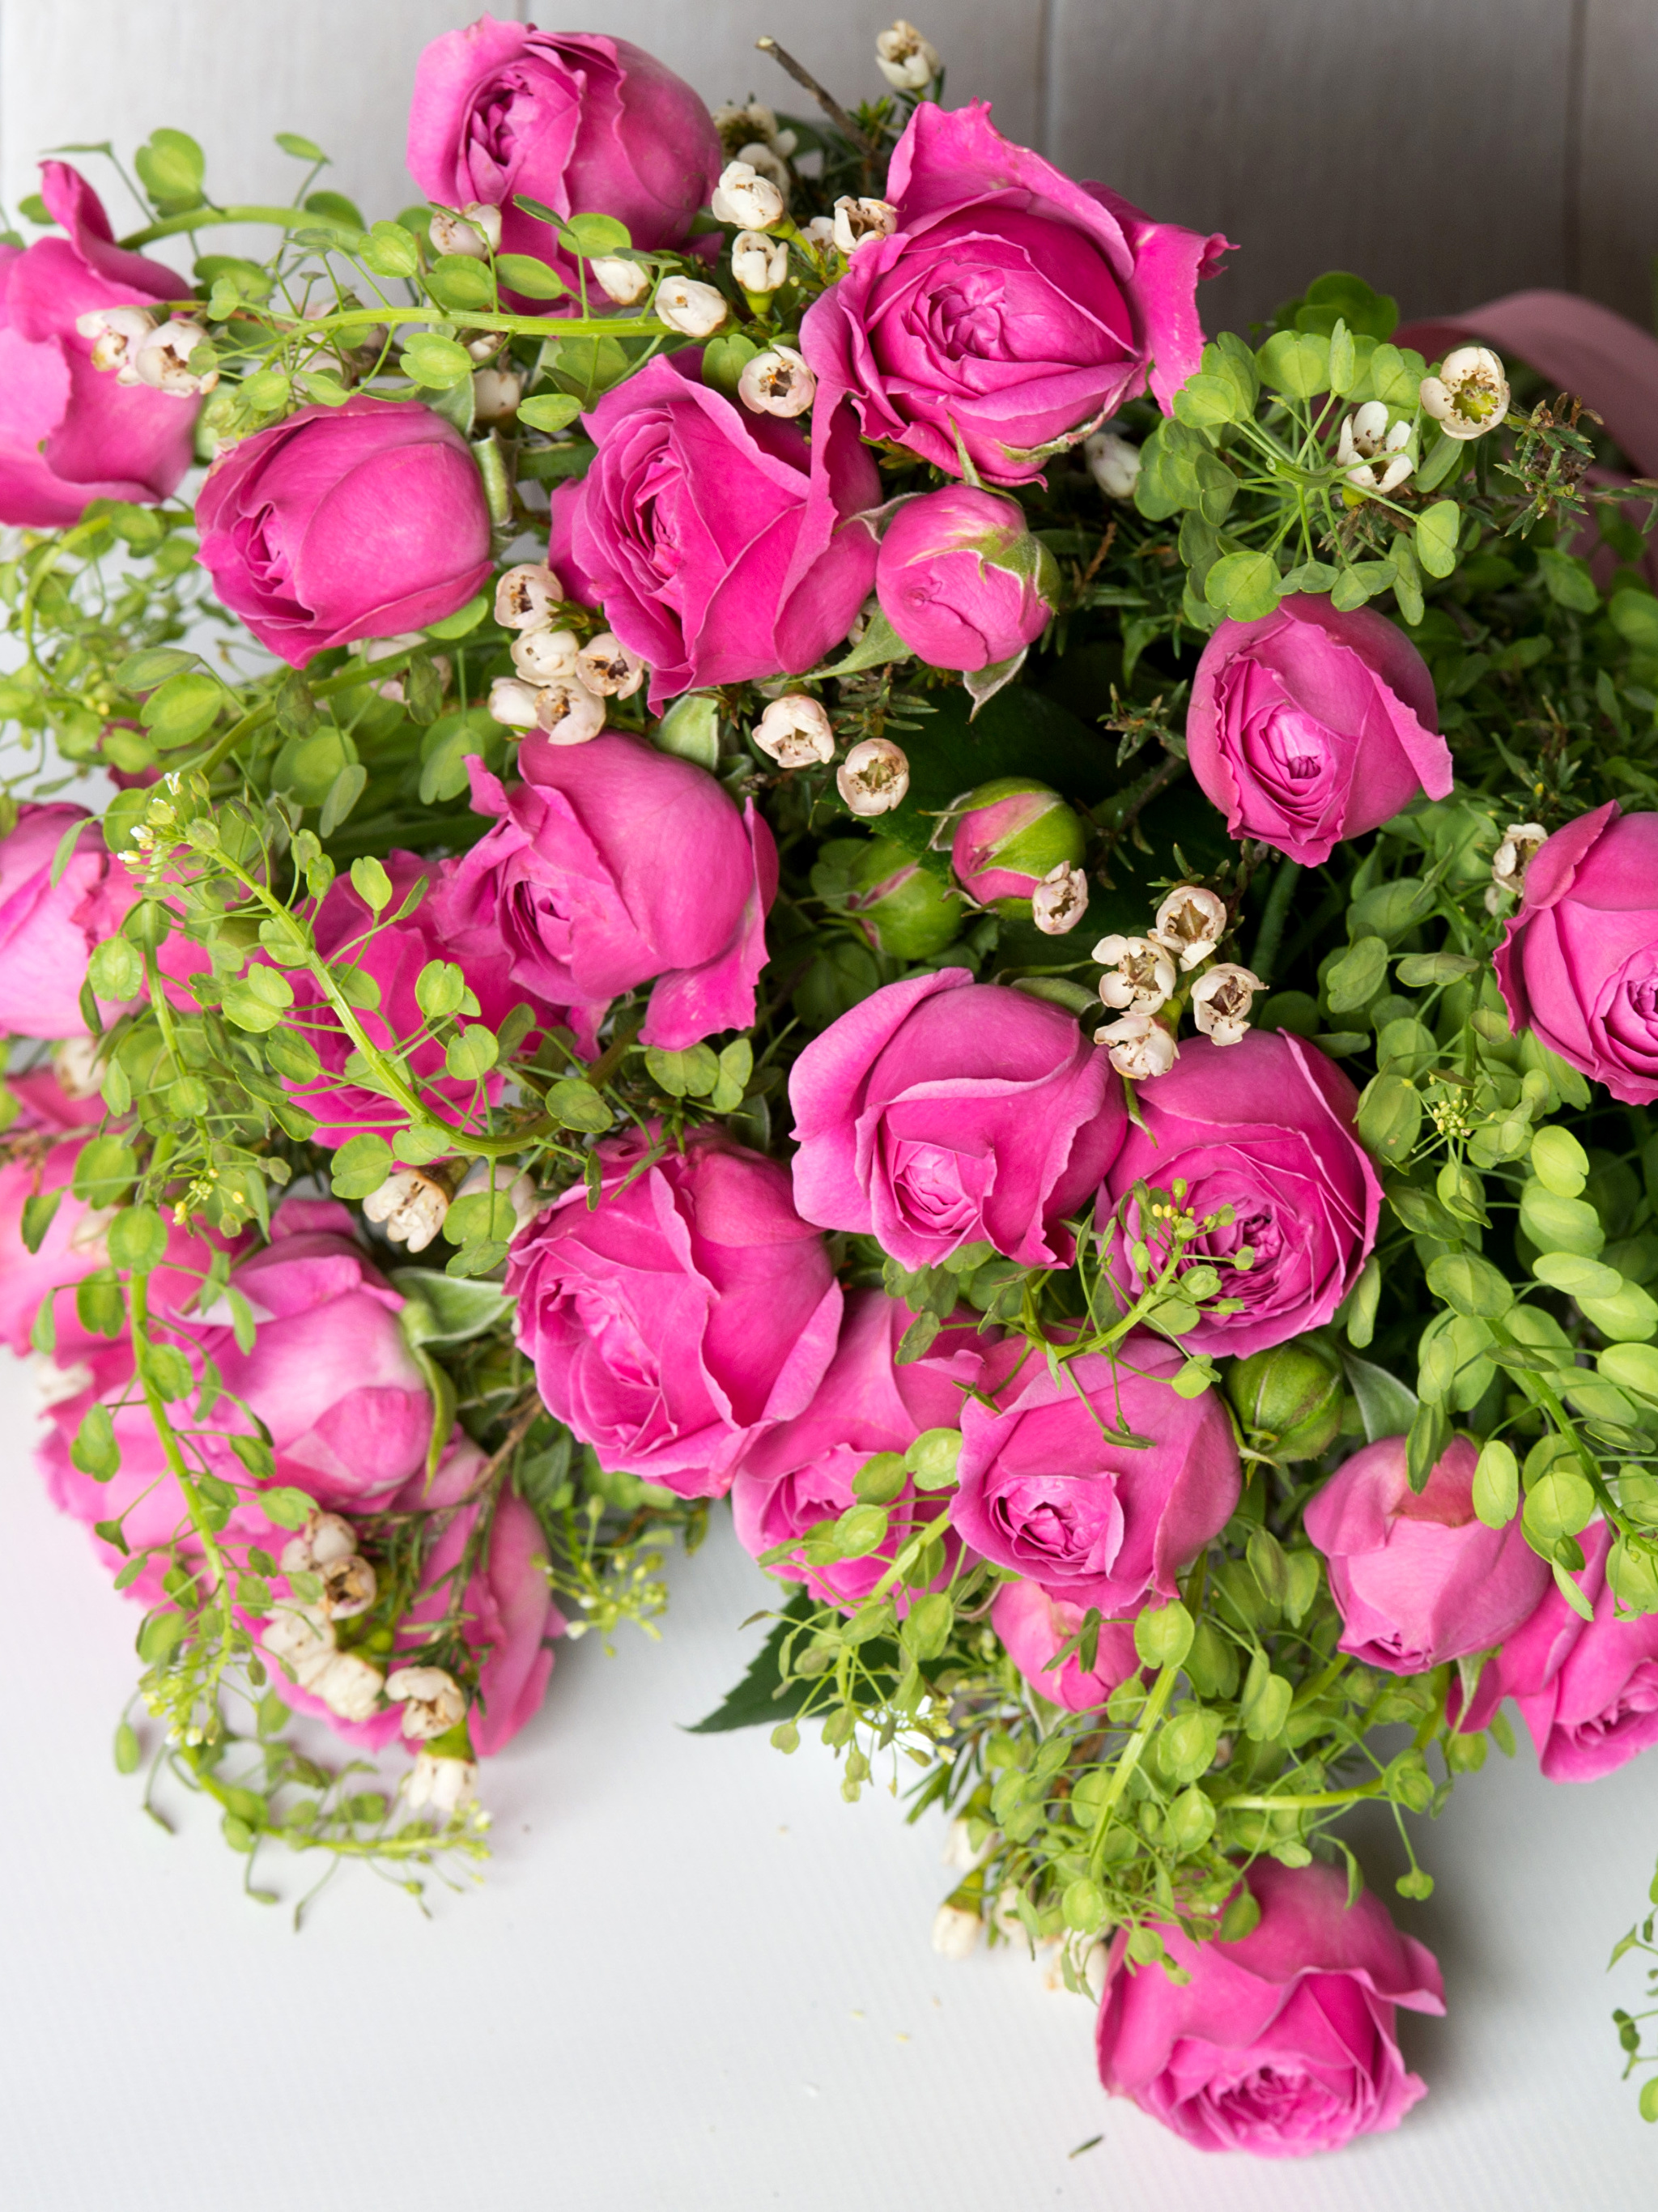 Bouquets_Roses_Pink_511368_2048x2732.jpg